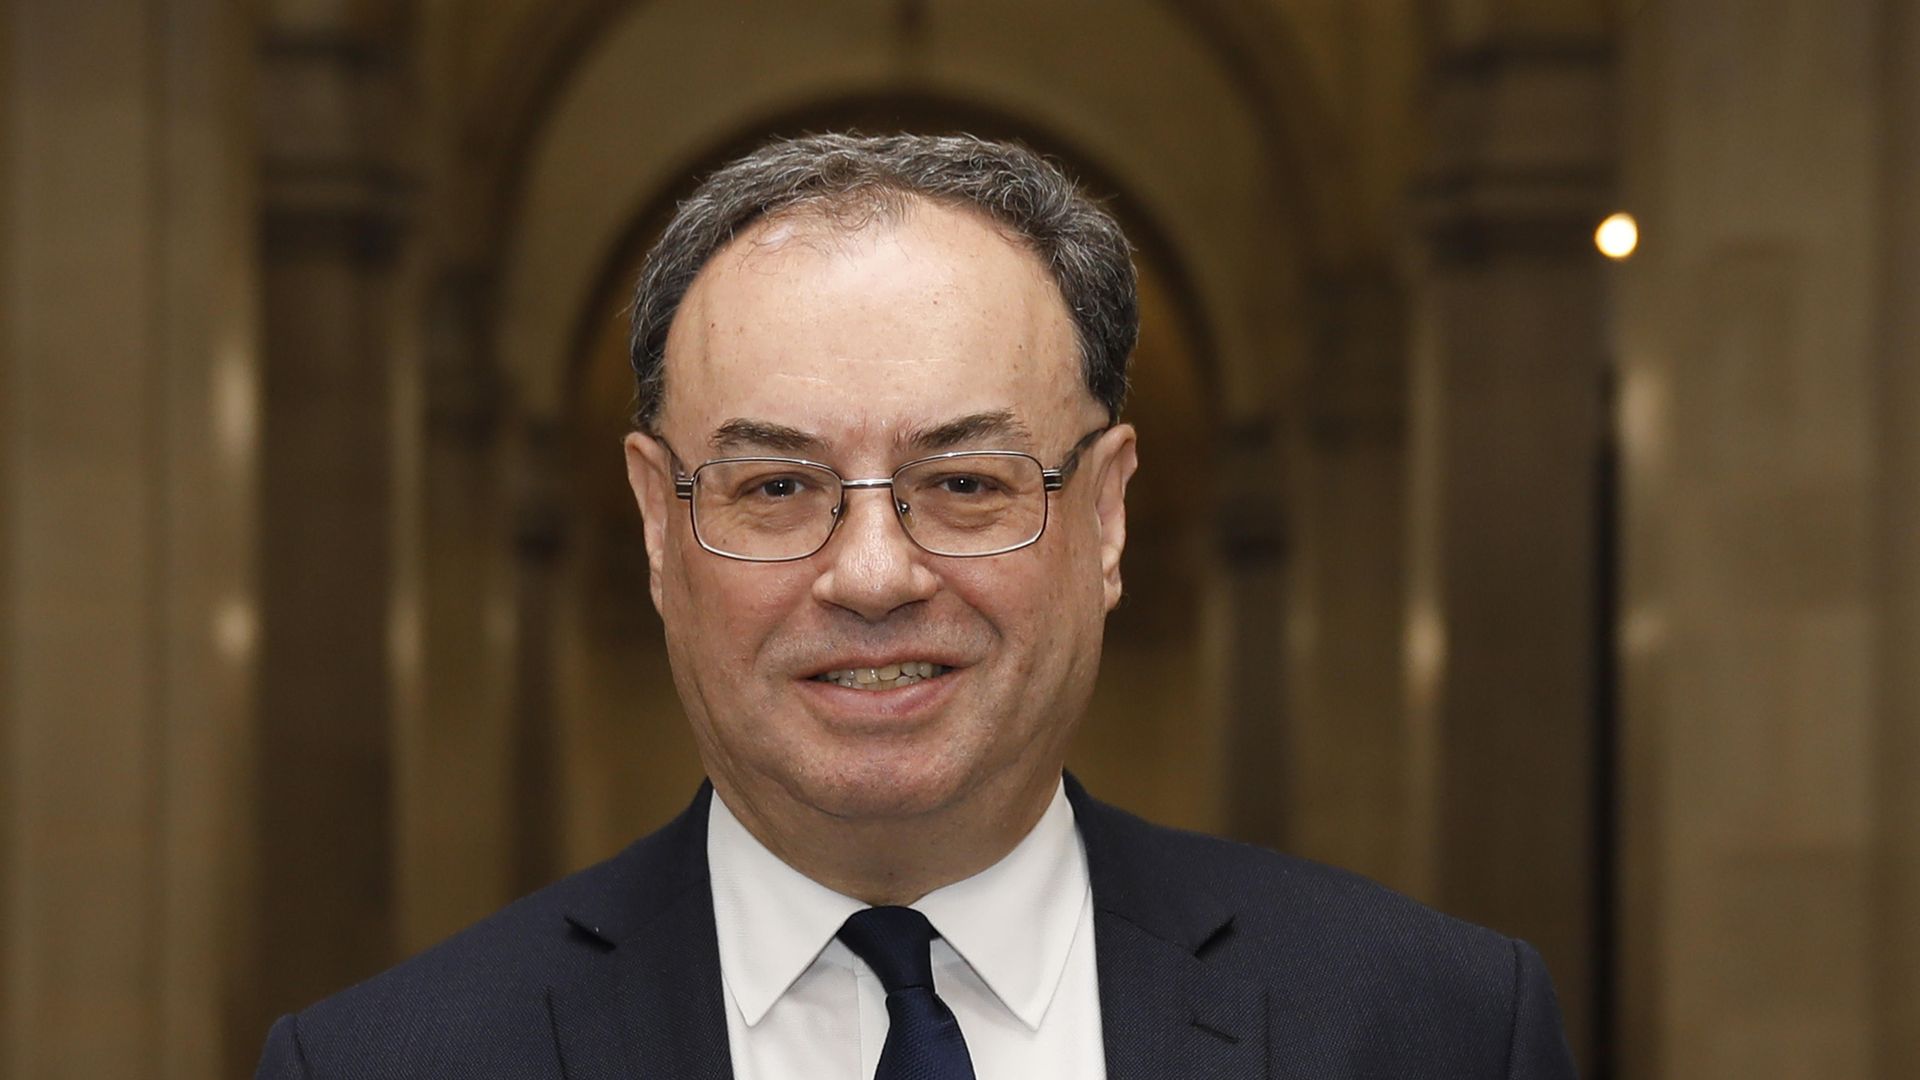 Governor of the Bank of England, Andrew Bailey - Credit: PA